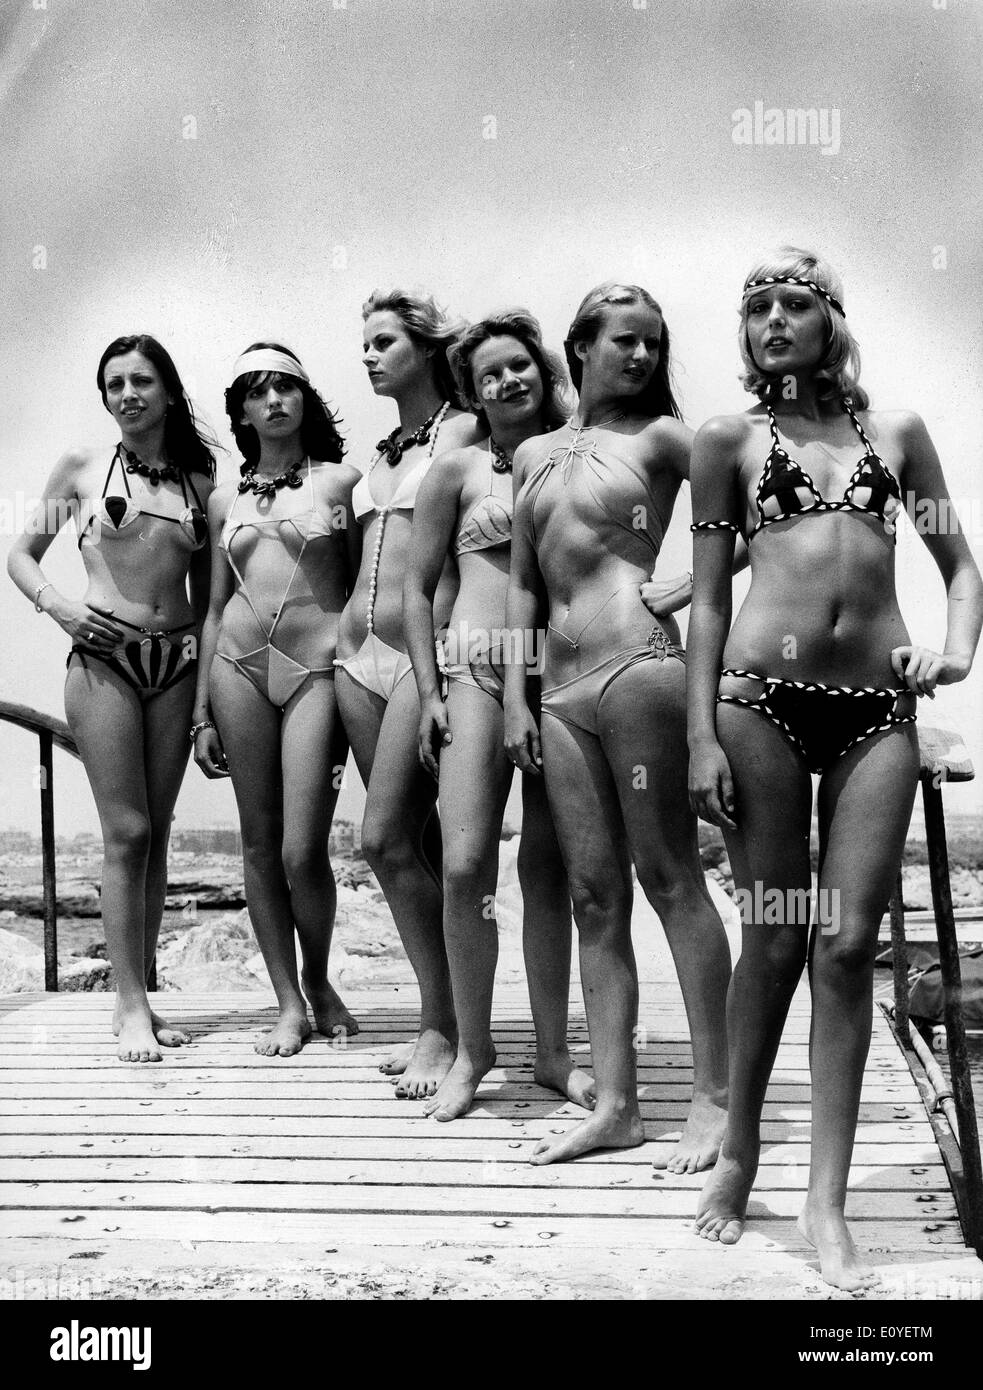 Jan. 01, 1970 - London, England, United Kingdom - File Photo circa:  1960s-1970s. Girls posing in bikini's in fashion shows, shoots and on  beaches tanning. According to the official version, the modern